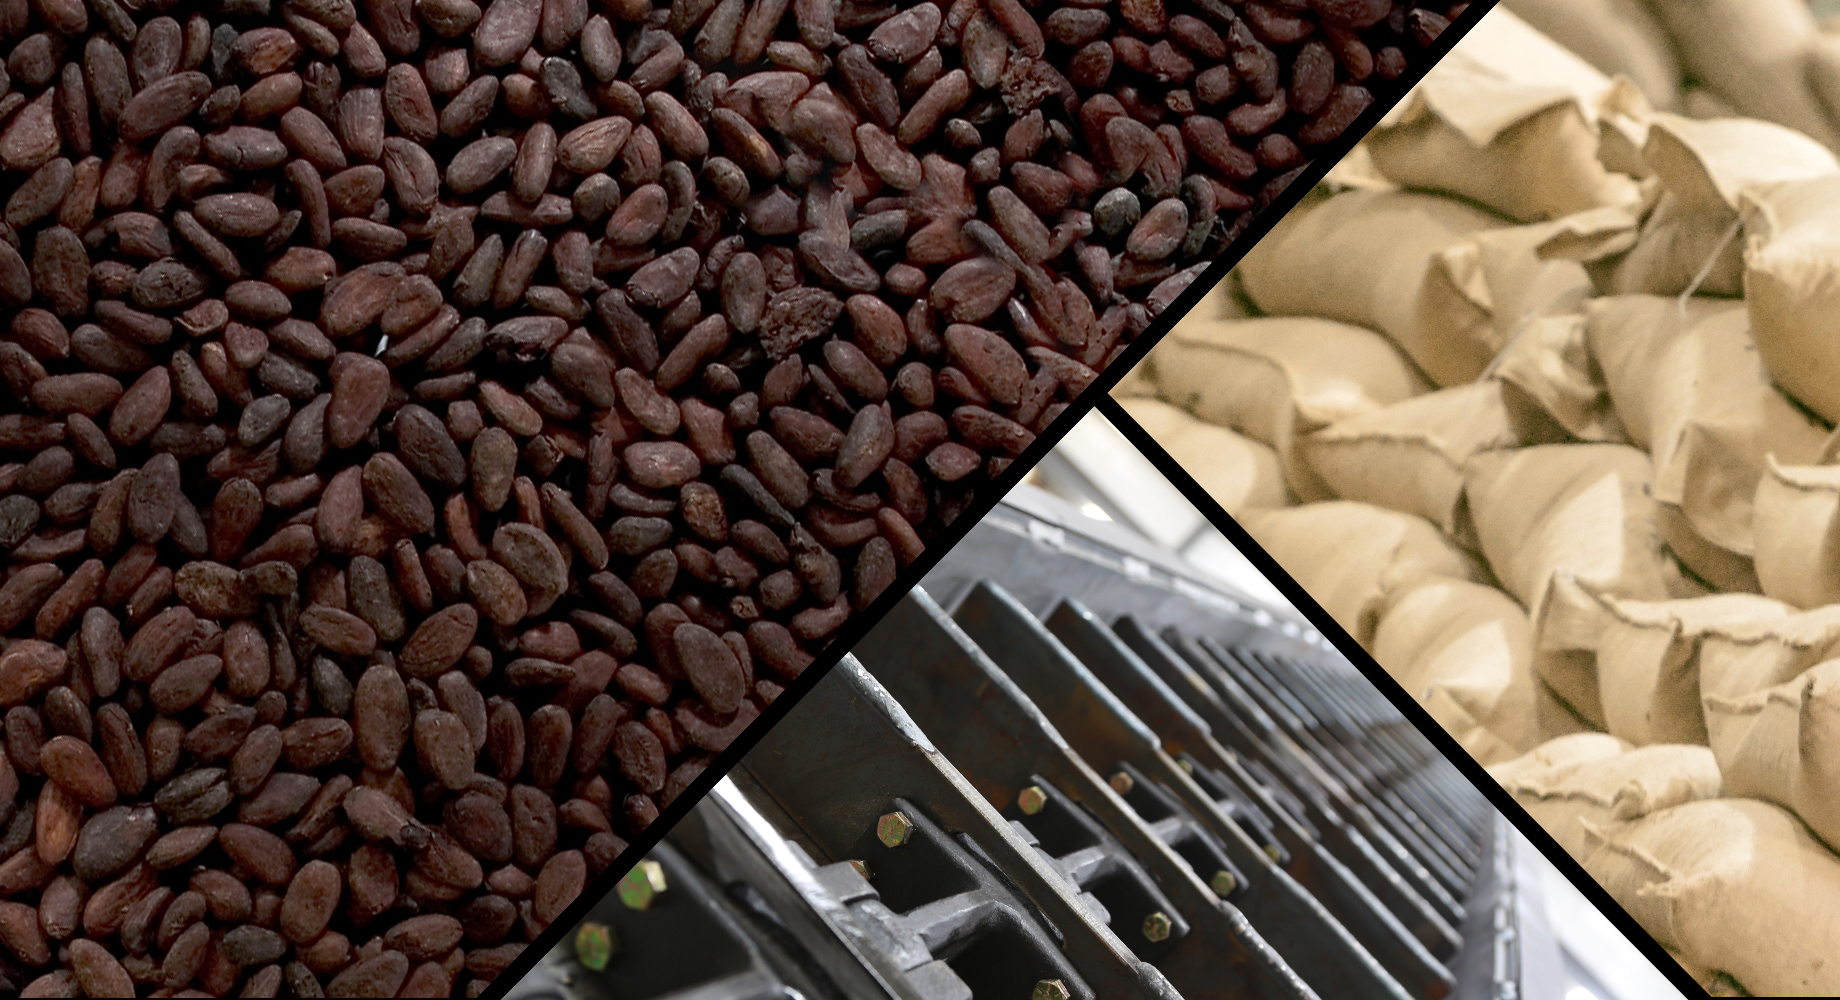 Cocoa beans and a conveyor for raw materials